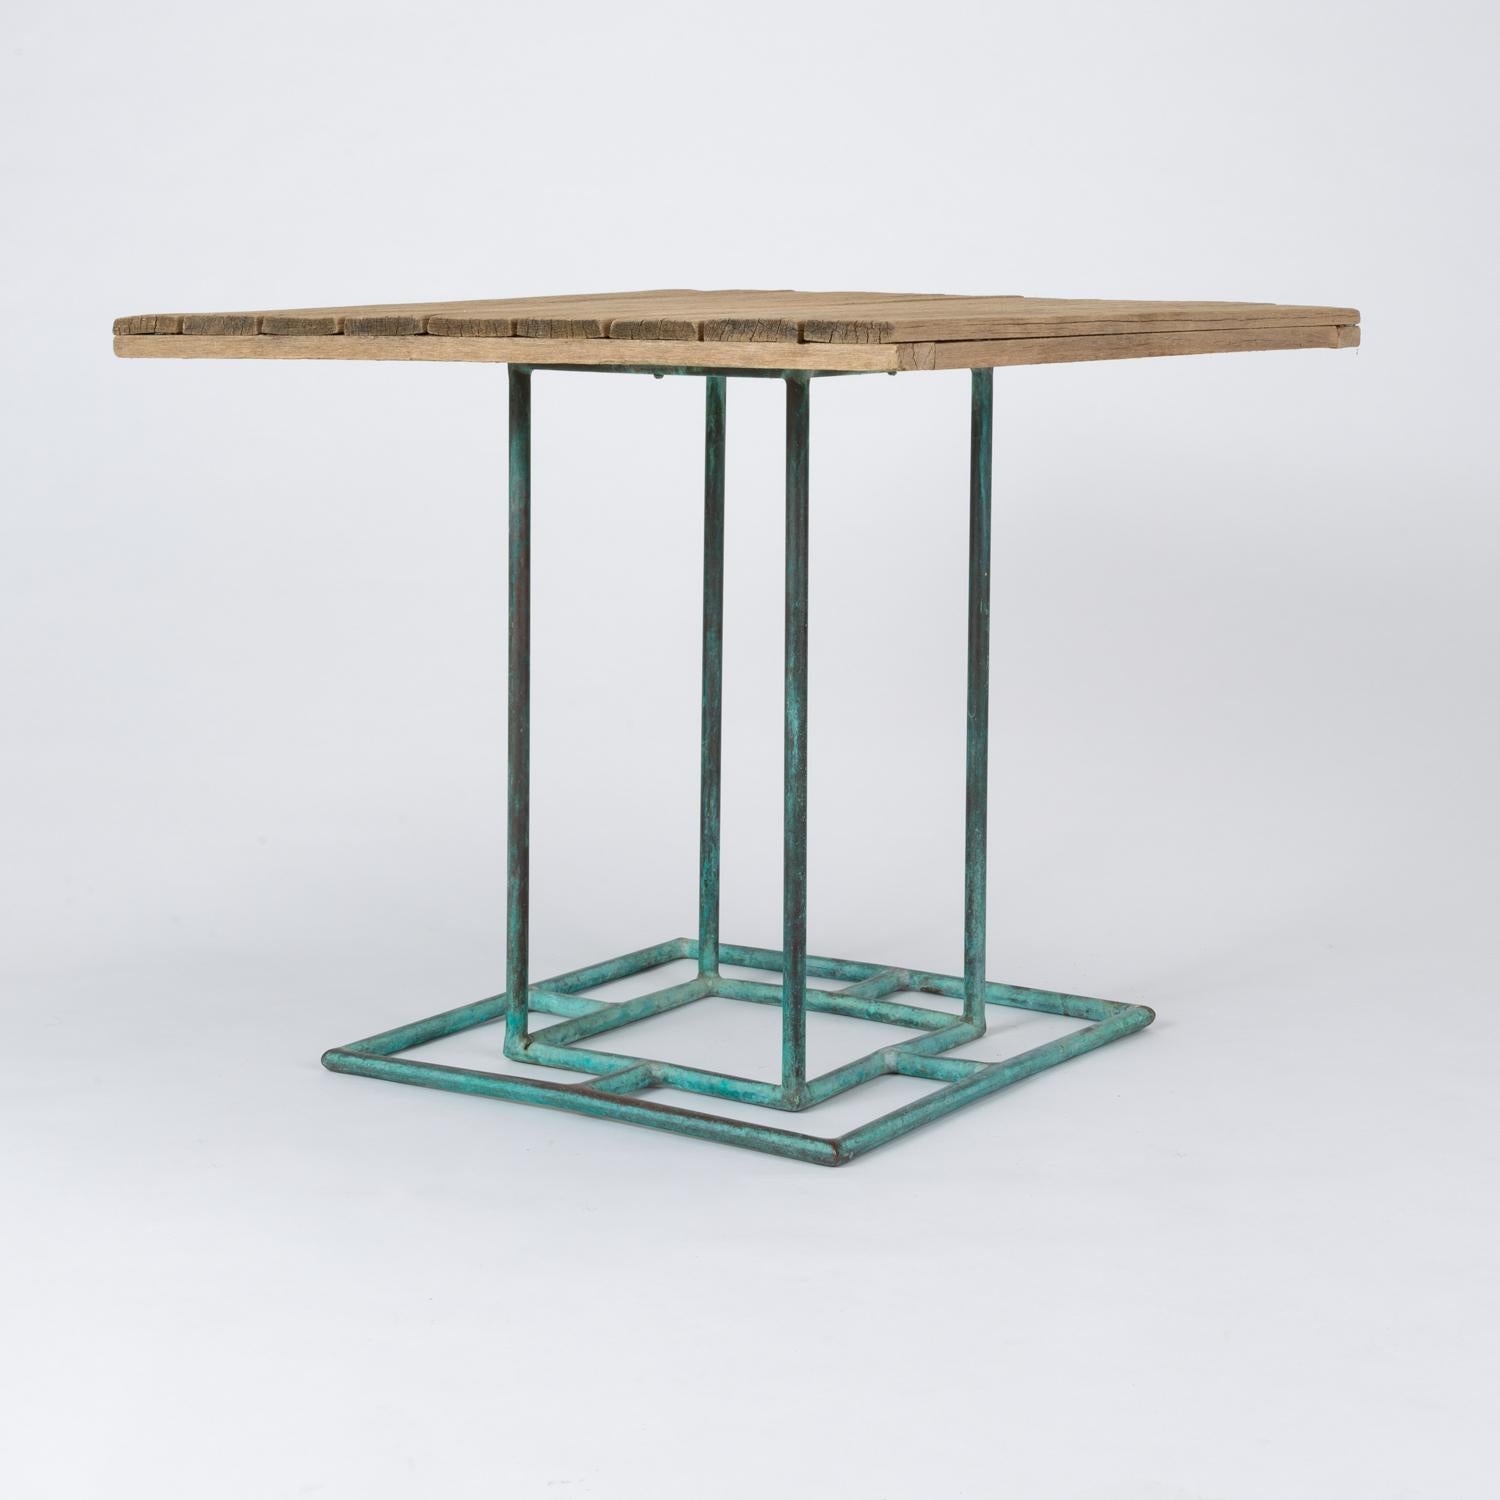 A model WT-2701 square patio table designed by Walter Lamb and manufactured by Brown Jordan. The table has a slatted surface in the original weathered wood, mounted on a bronze base. It’s subtle geometry suggests an Arts & Crafts sensibility, with